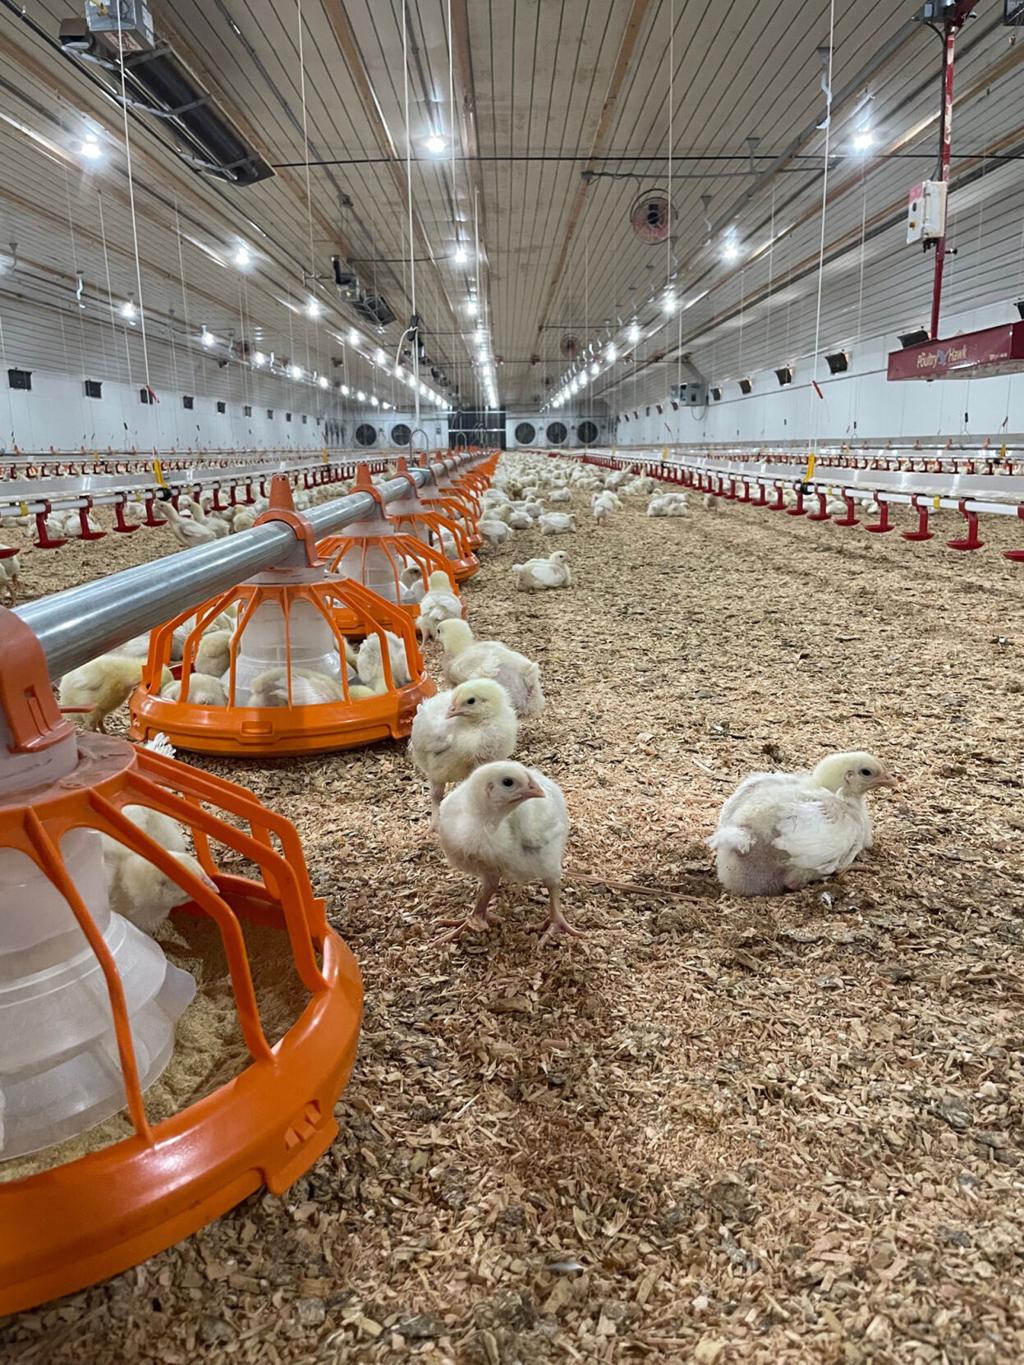 Large chicken farms raise concerns in rural Oregon, The Land